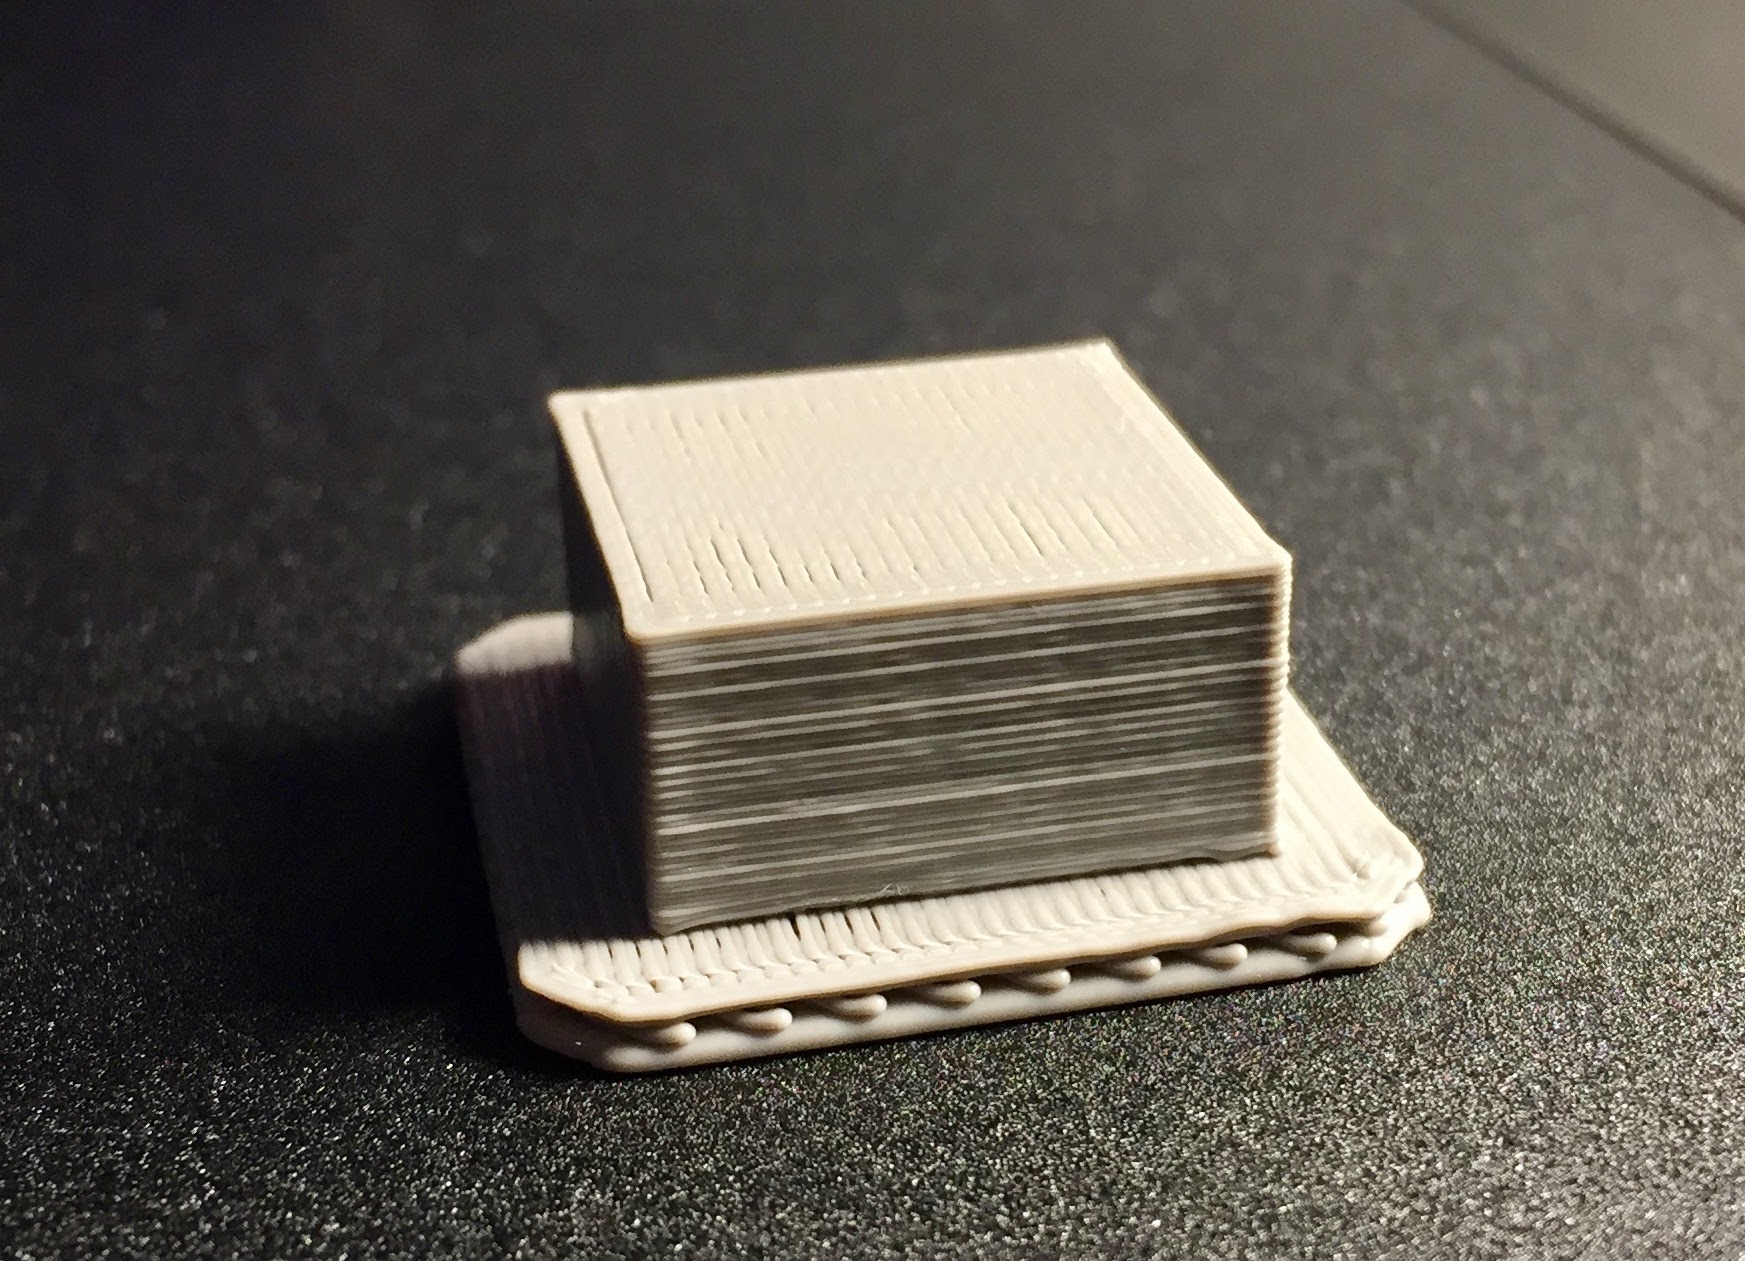  A sample 3D print with a beefy raft 